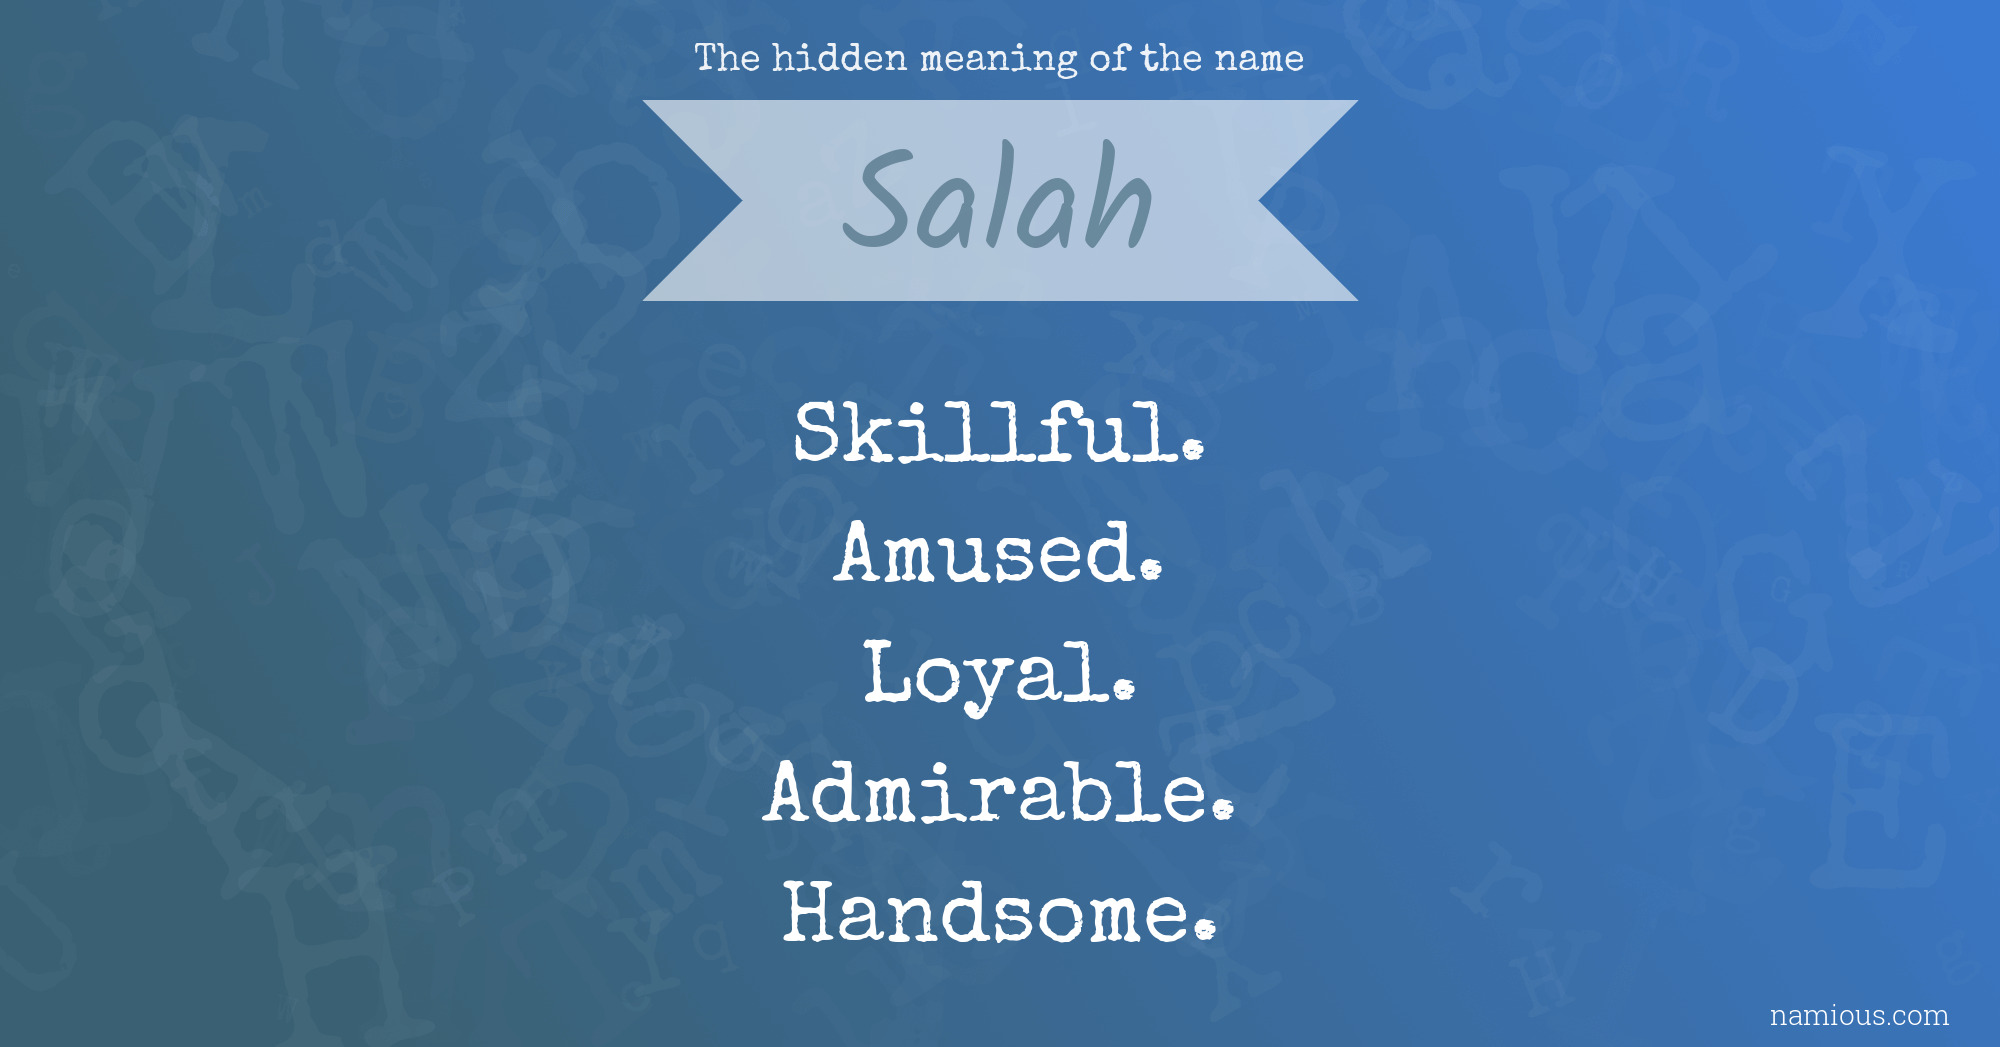 The hidden meaning of the name Salah